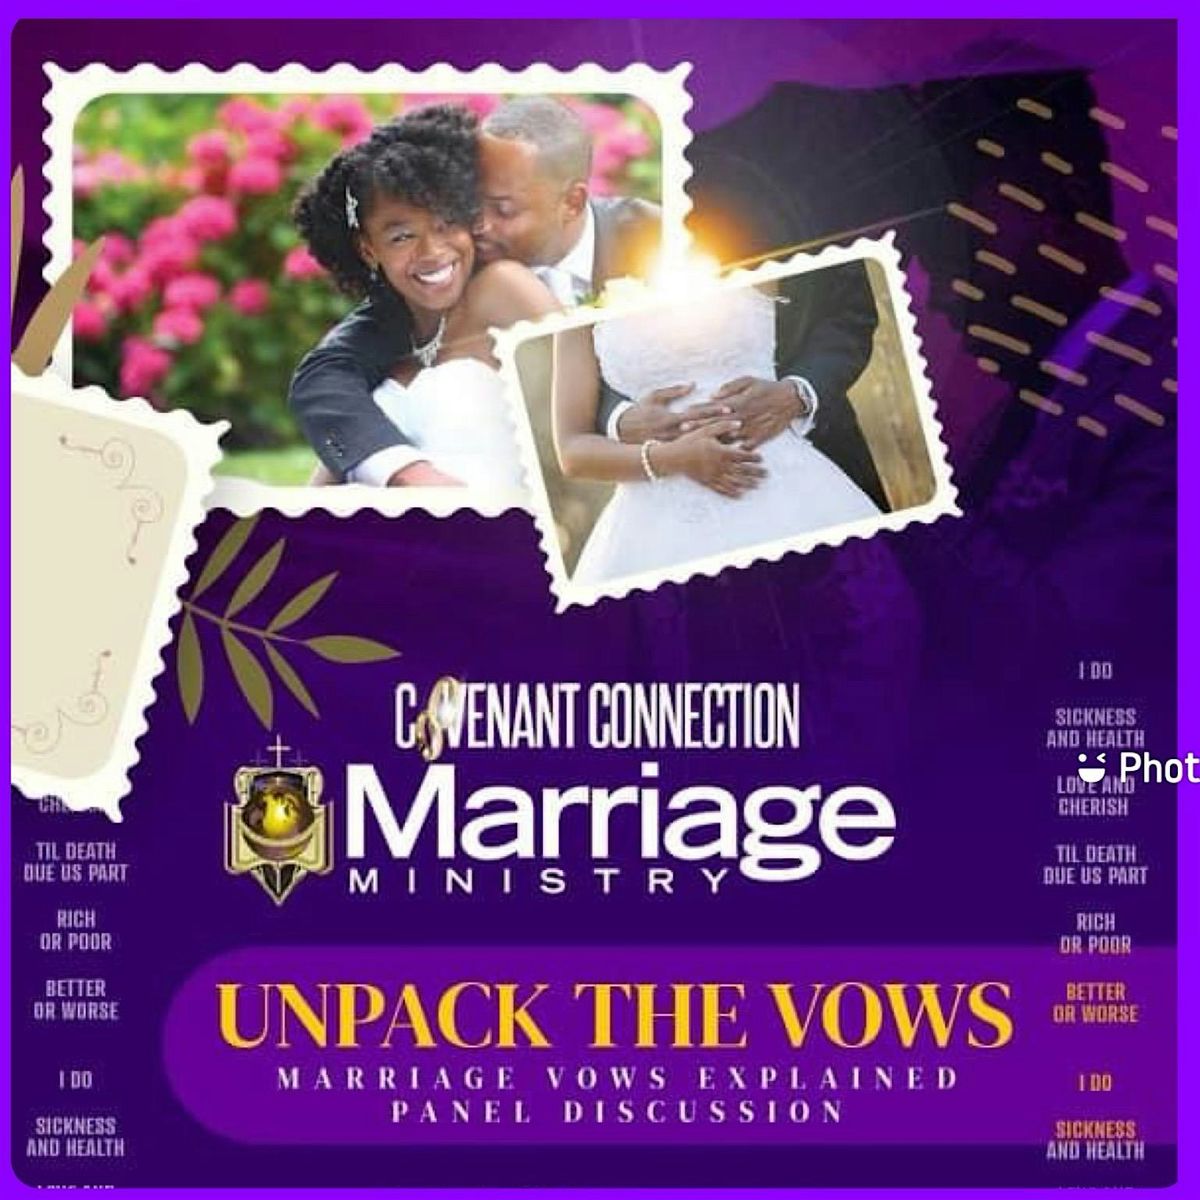 Covenant Connection Marriage Ministry presents Love On the Lake Boat Cruise